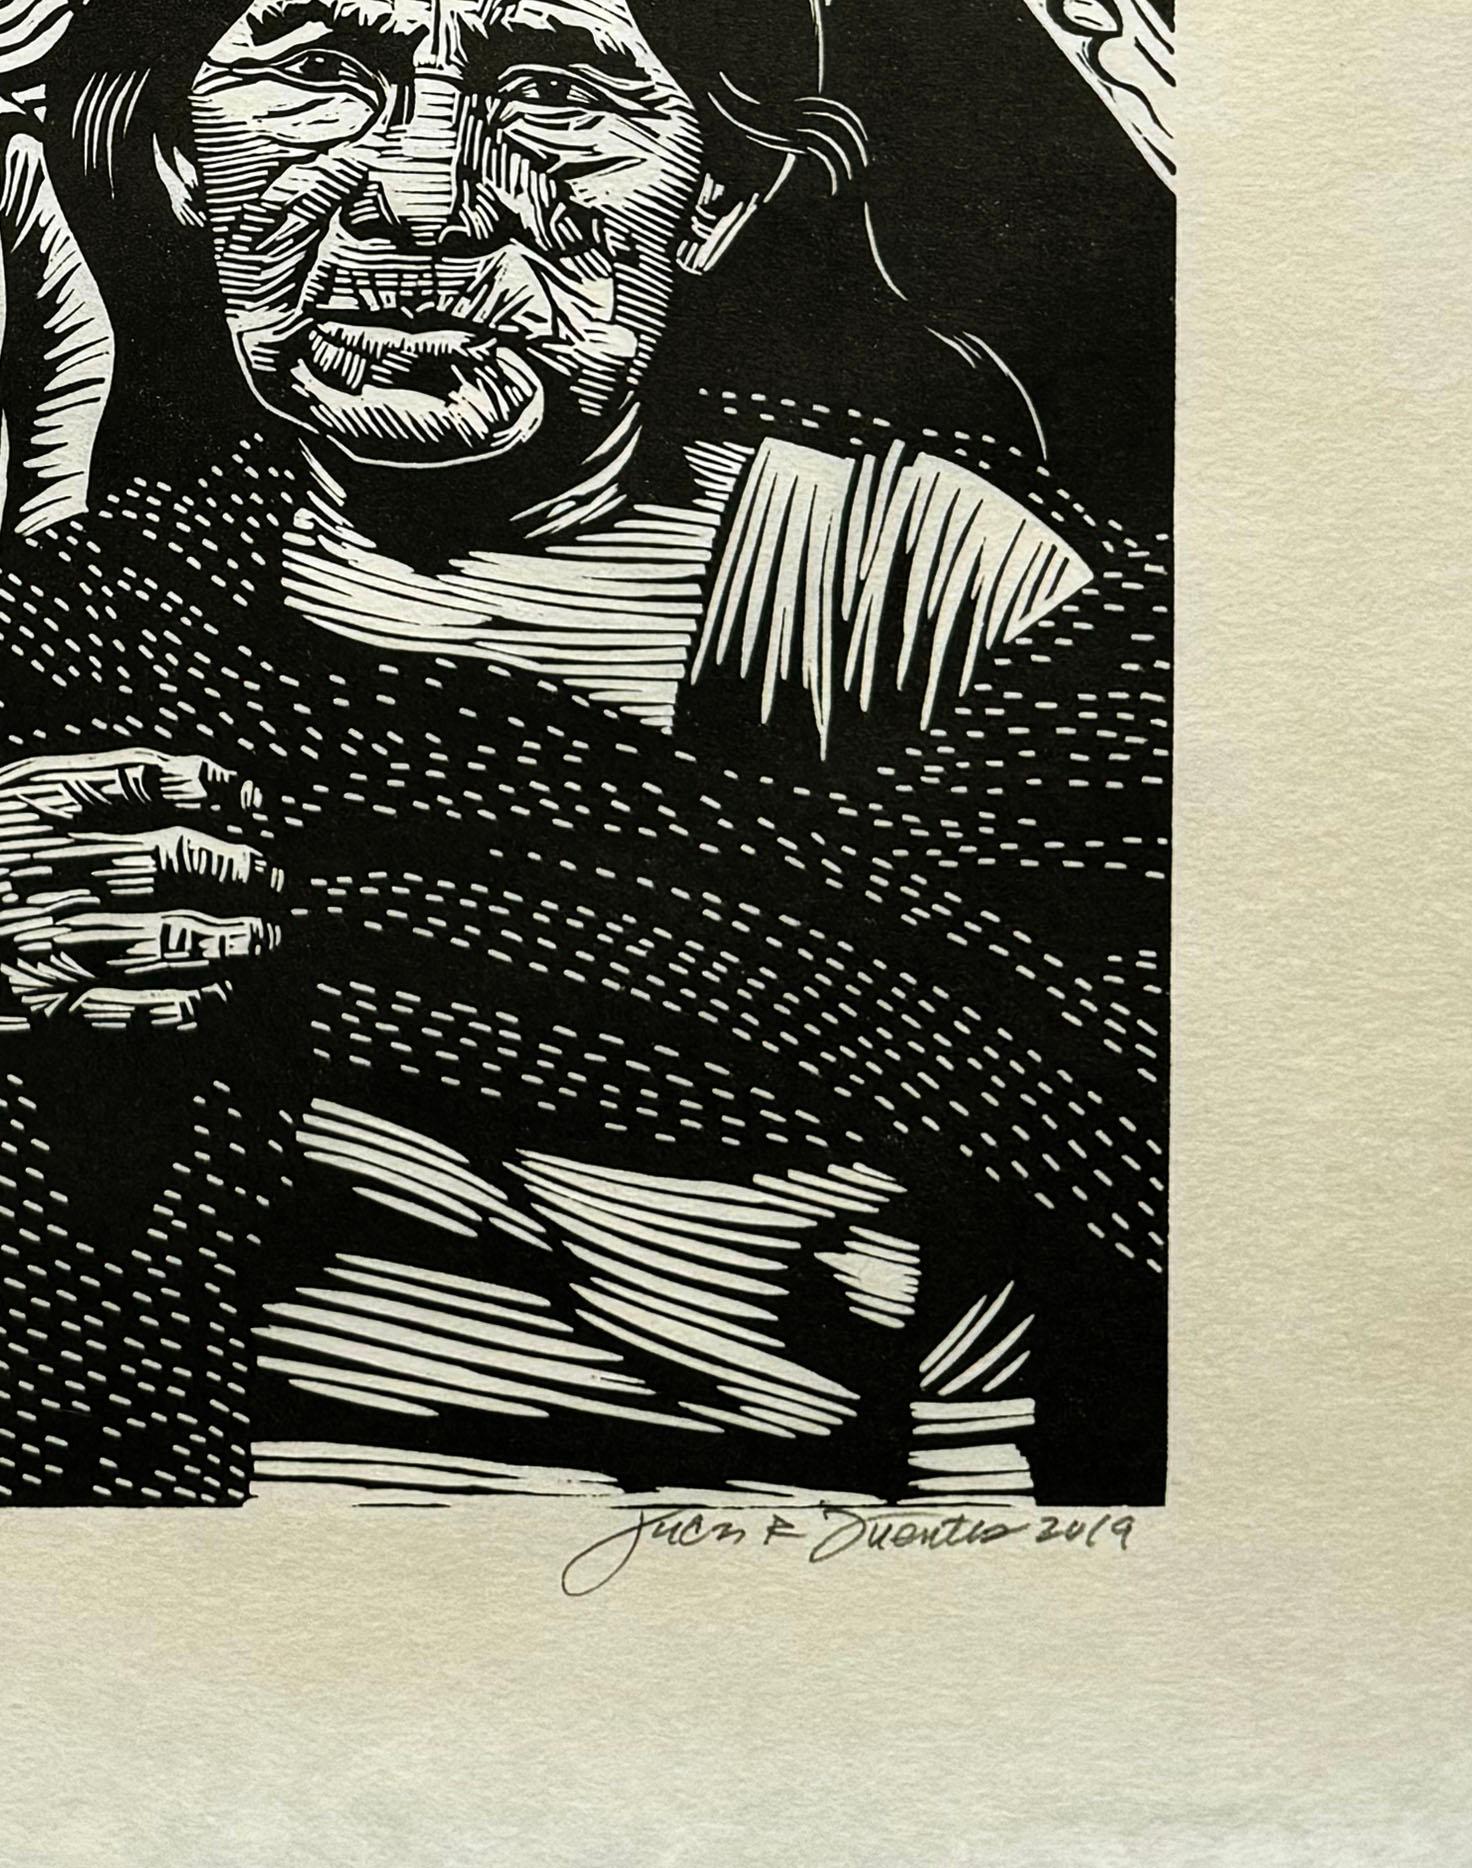 Medium: linocut
Year: 2023
Image Size: 24 x 18 inches
Edition Size: 10

An hommage to all those immigrants who die on the journey as they seek asylum in new countries.

As a cultural activist/artist/printmaker, Juan Fuentes has dedicated his career